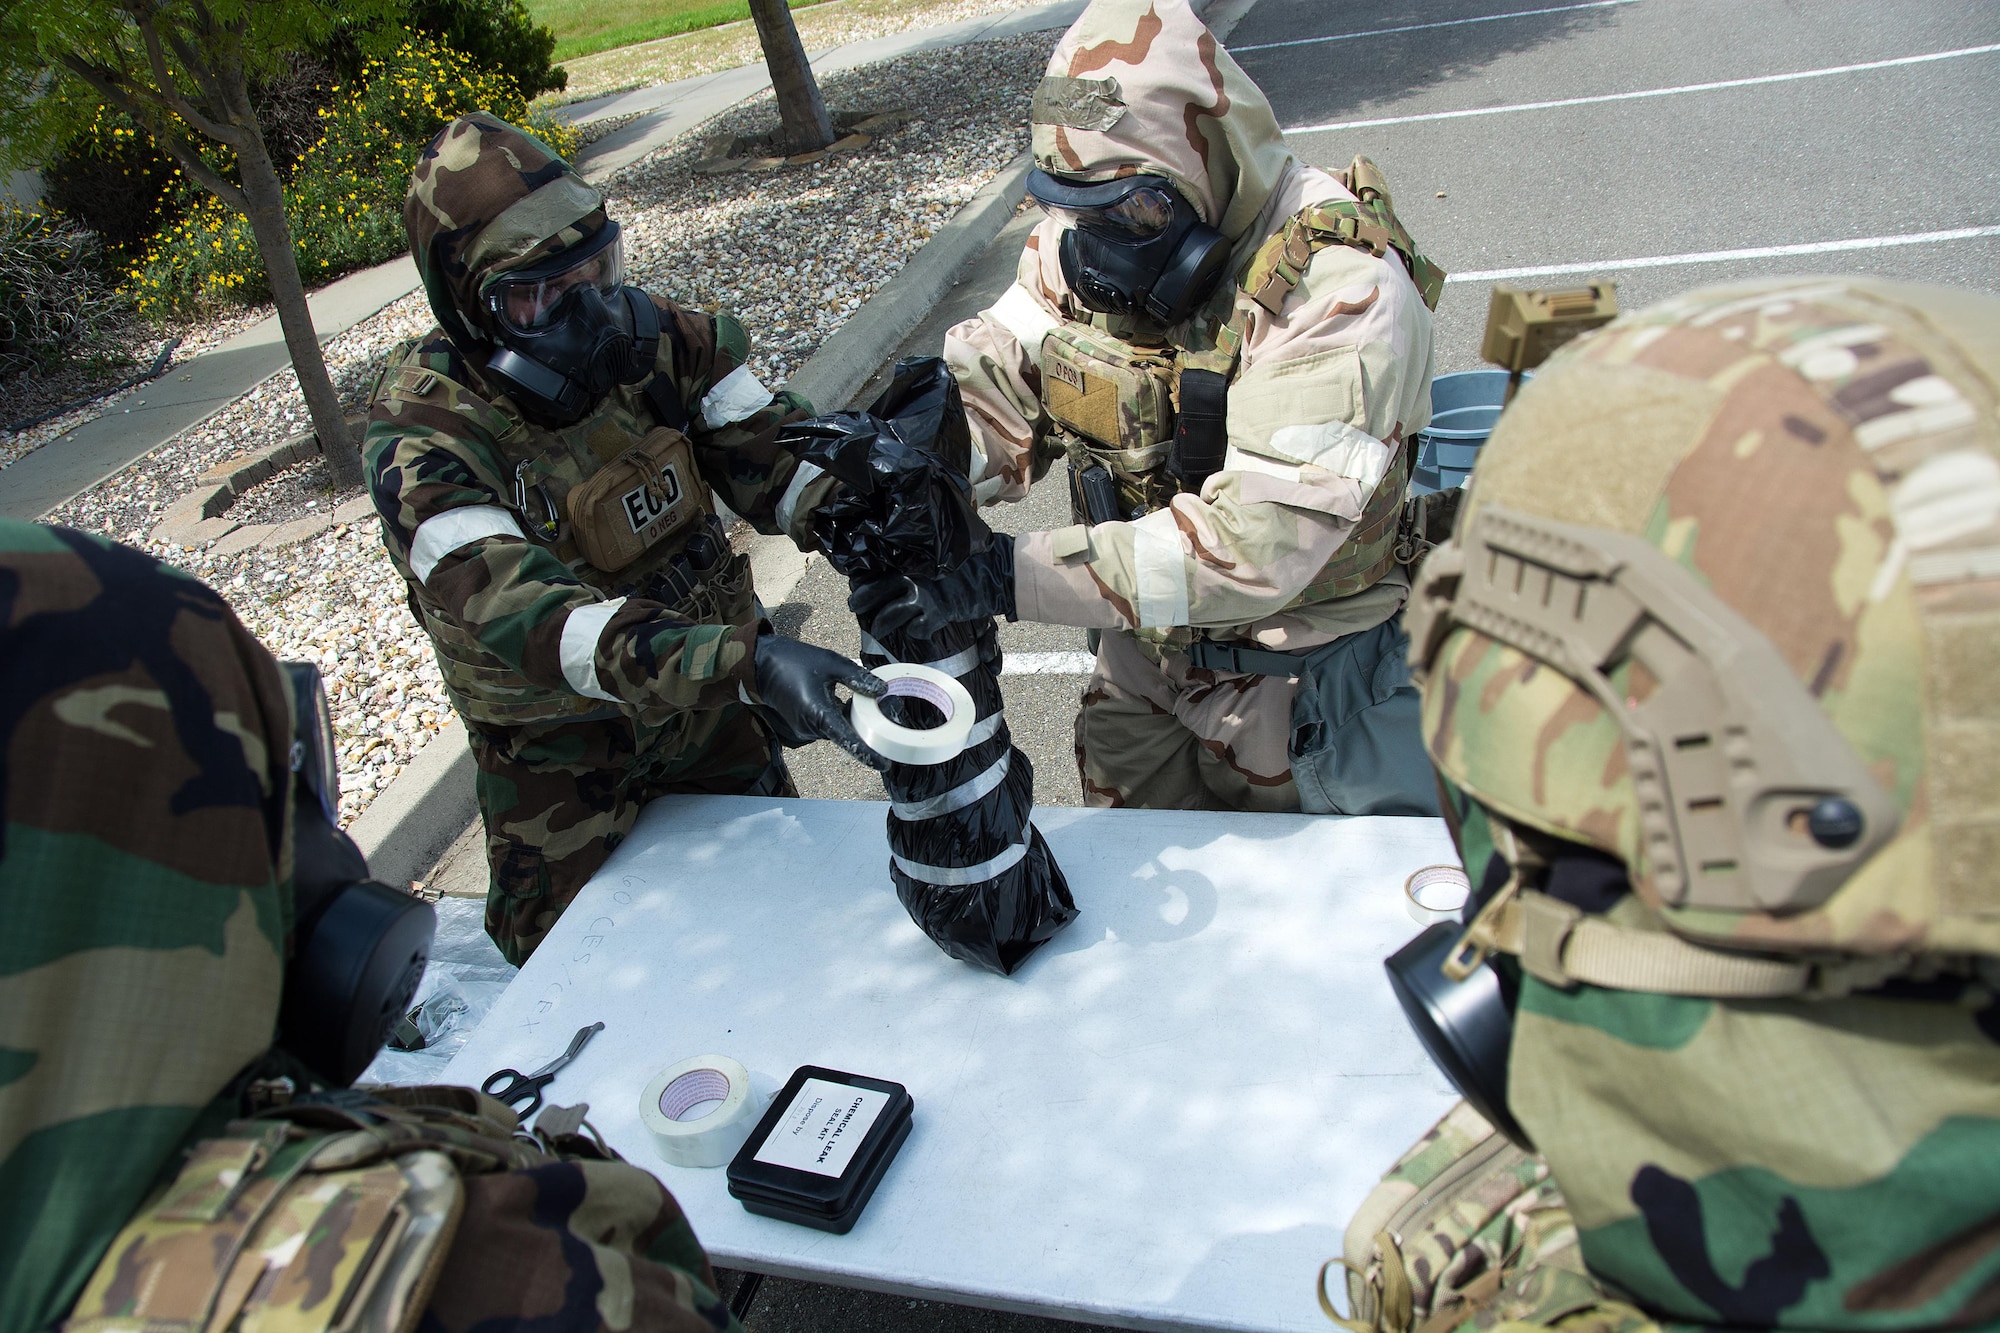 Airmen 1st Class Justin Coleman, Ryan Countryman, and Bobby Potts, and Staff Sgt Richard Halter, 60th Civil Engineer Squadron explosive ordnance technicians, participate in a training scenario at Travis Air Force Base, Calif., on April 17, 2017. EOD techs conduct training on various threats to ensure they are prepared for deployment. (U.S.Air Force photo/Staff Sgt. Daniel Phelps)